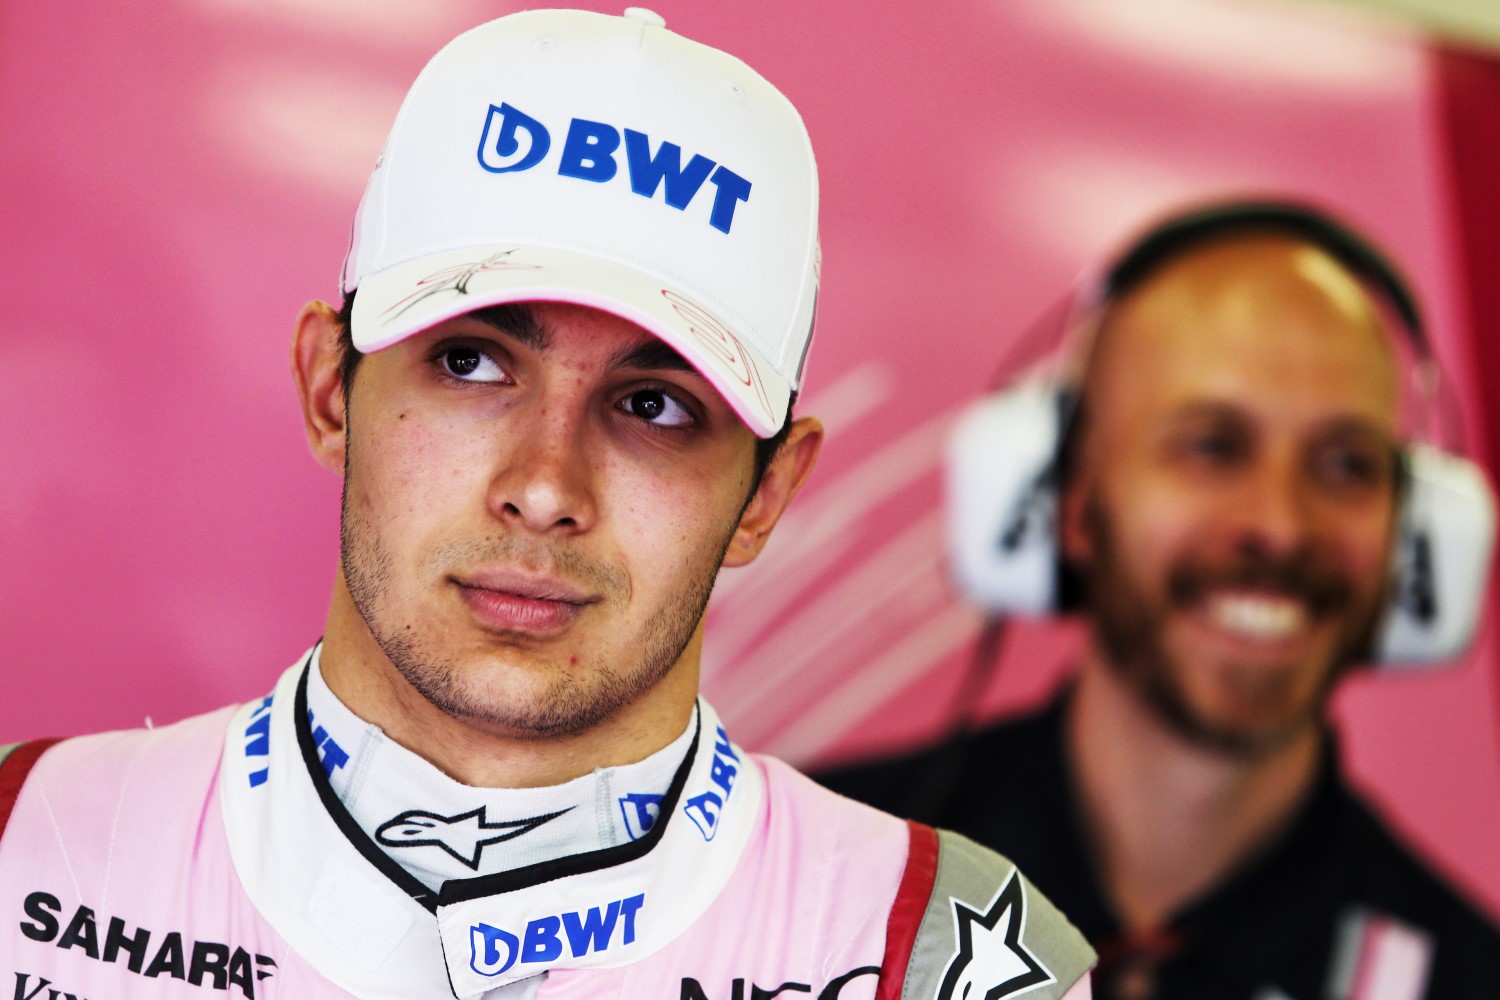 Ocon will warm the bench in 2019